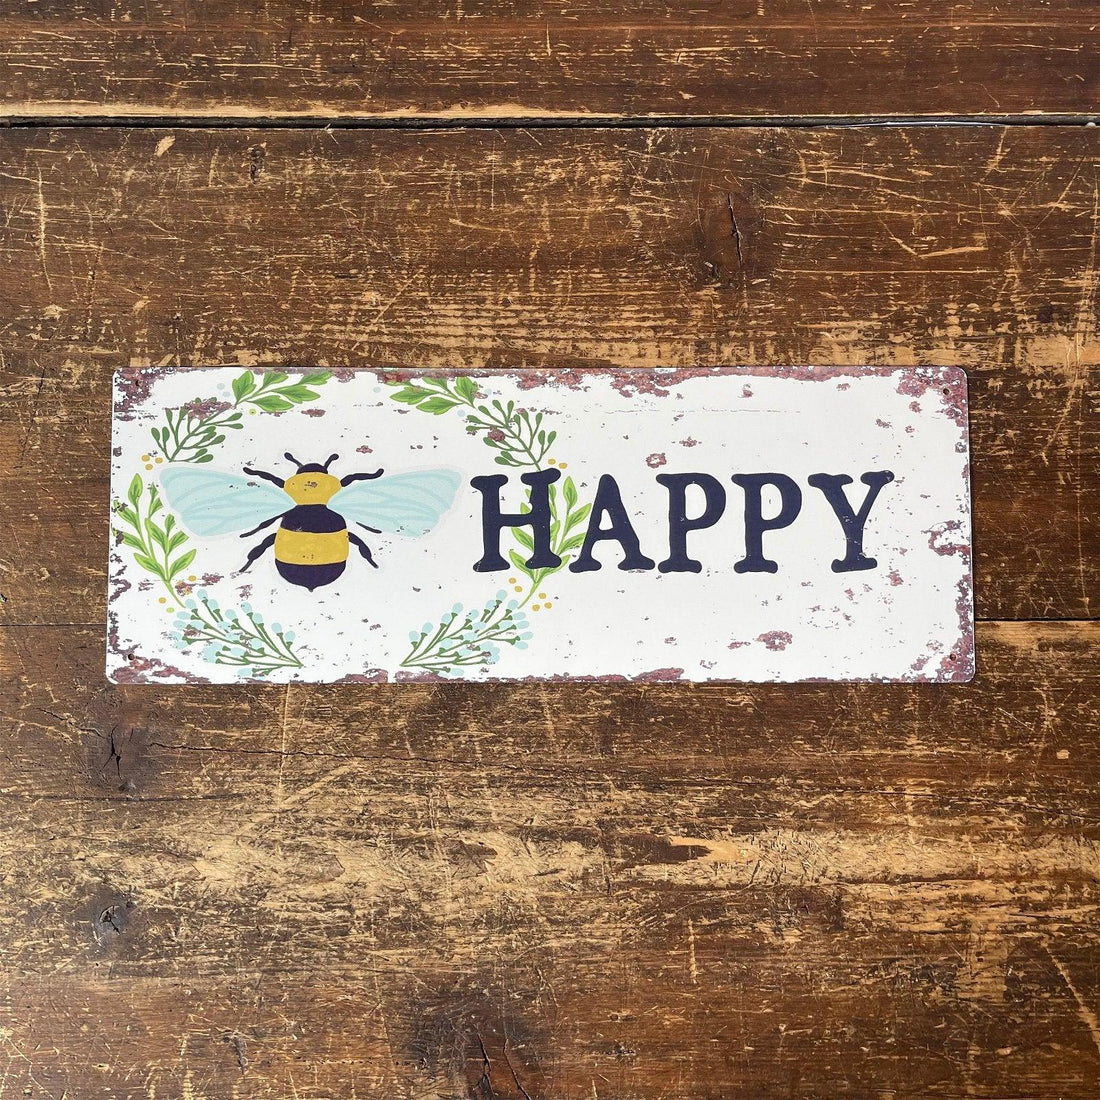 Vintage Metal Sign - Bee Happy Wall Sign - £22.99 - Signs & Rules 